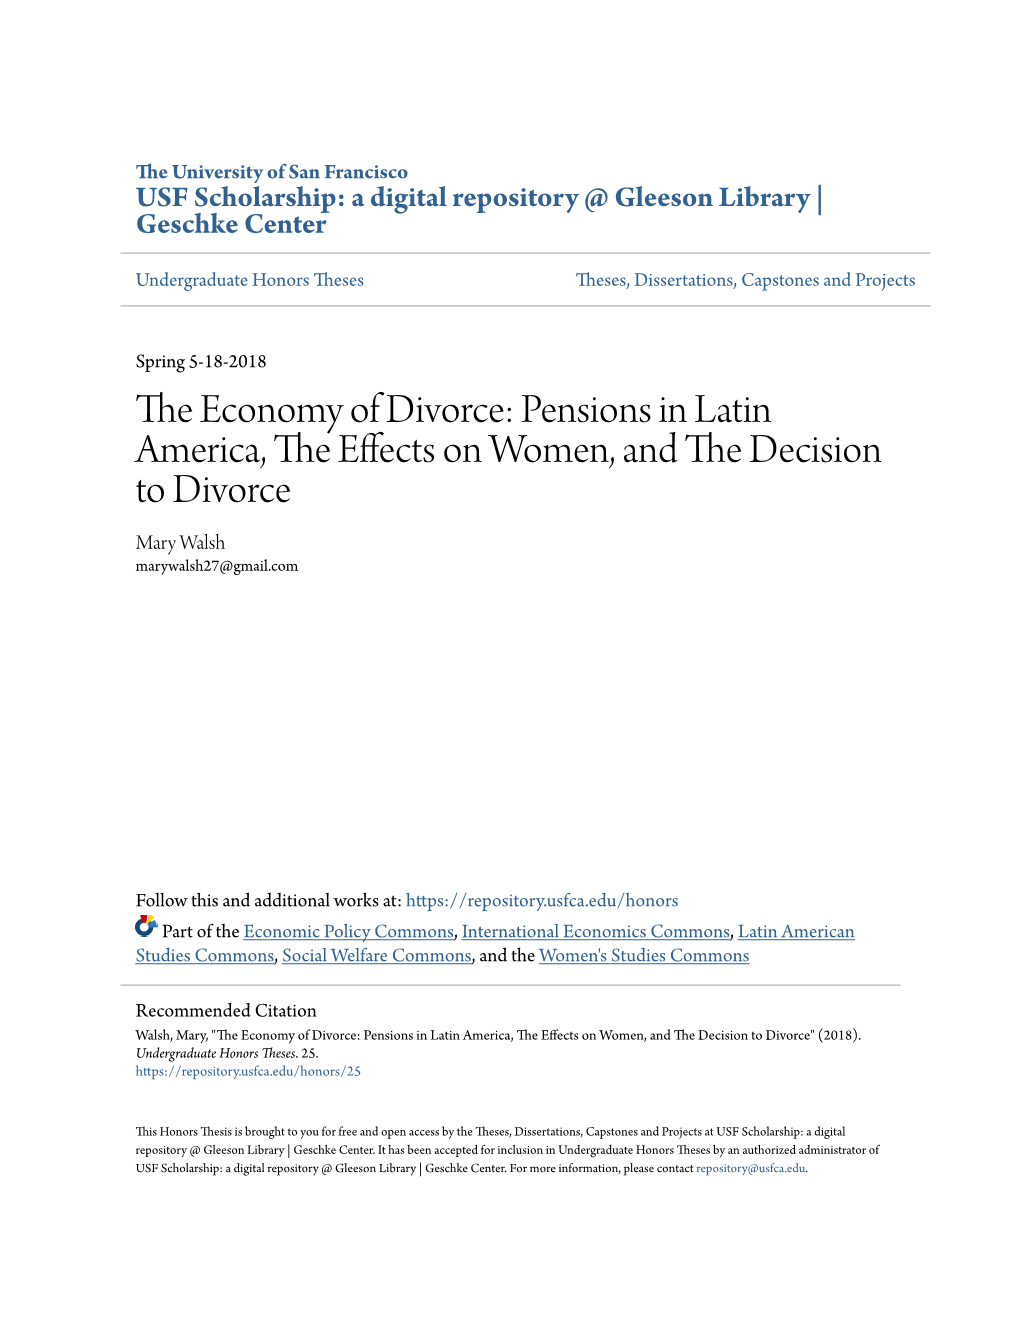 The Economy of Divorce: Pensions in Latin America, the Effects On